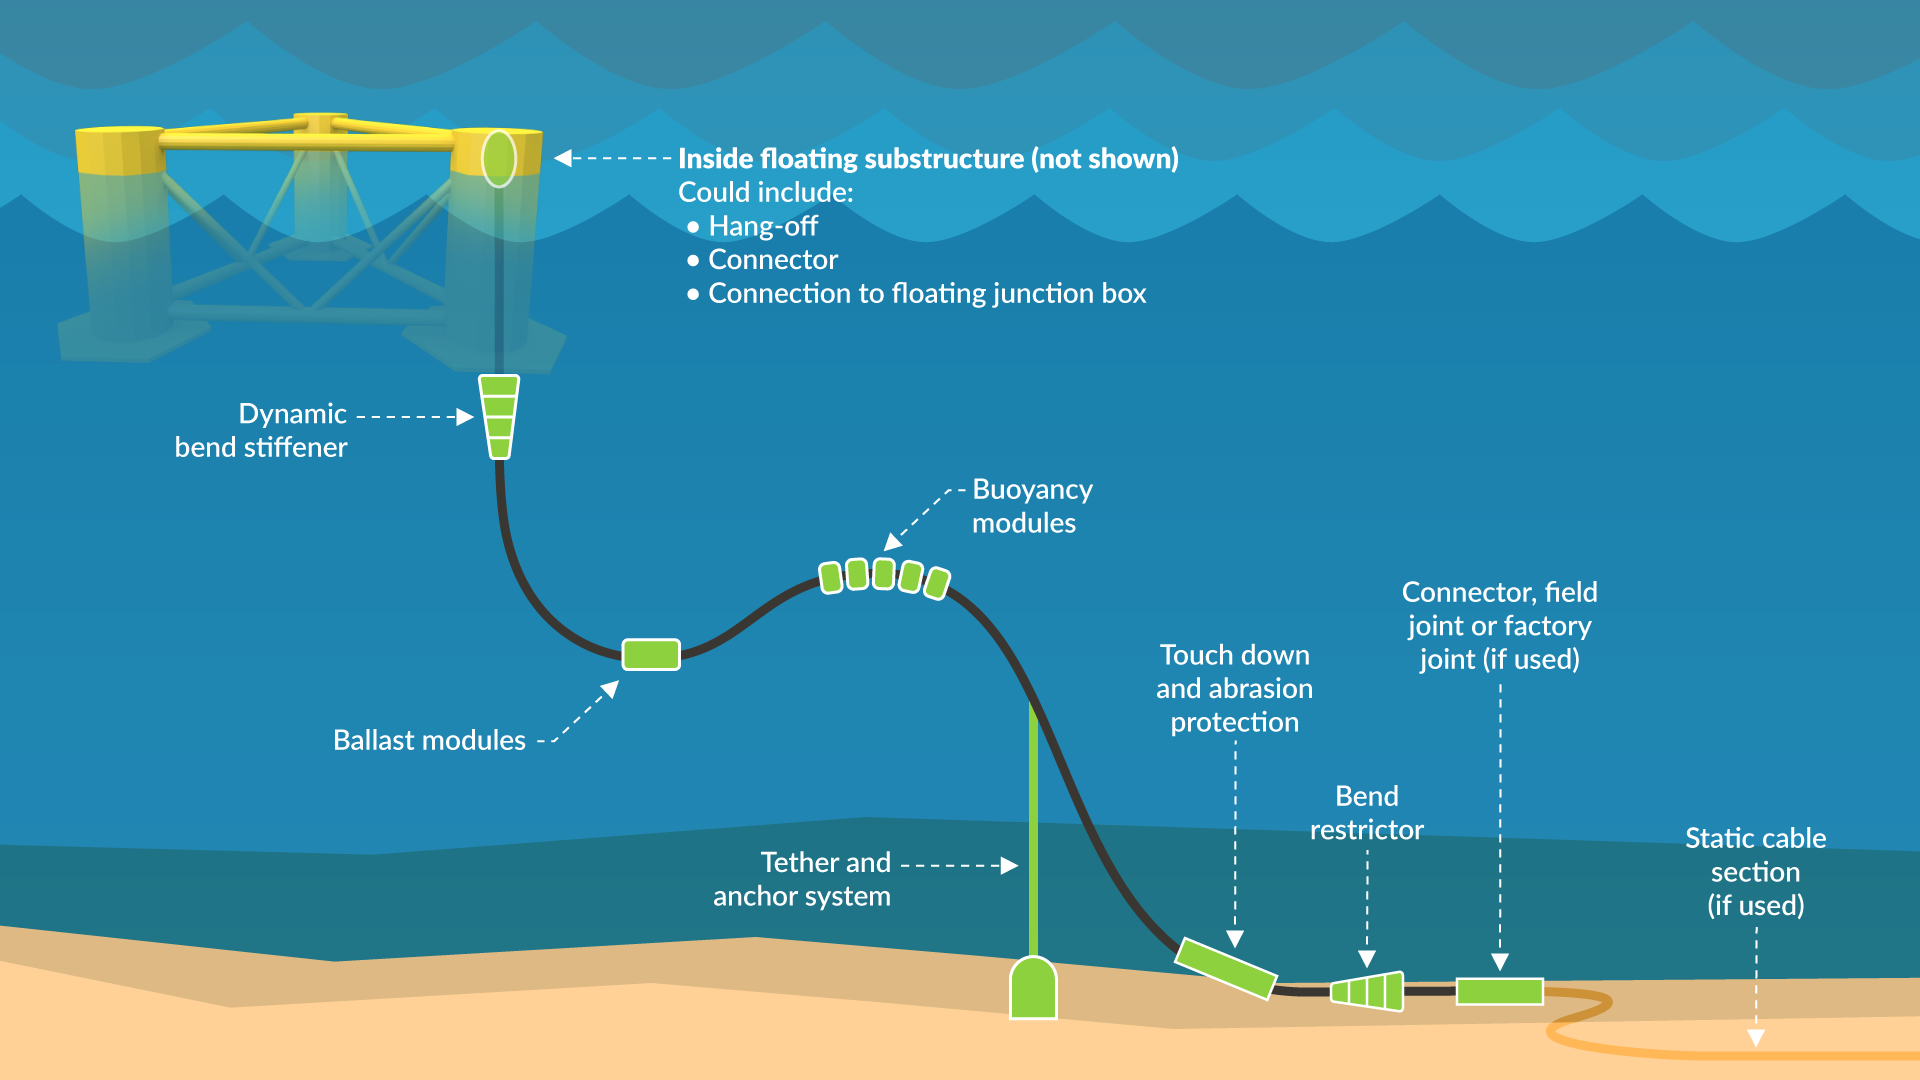 Floating offshore wind dynamic cable system.An actual system would not use all of these elements at the same time. The horizontal distance between the floating substructure and the touchdown point is typically around 200 m. Image courtesy of BVG Associates. All rights reserved.